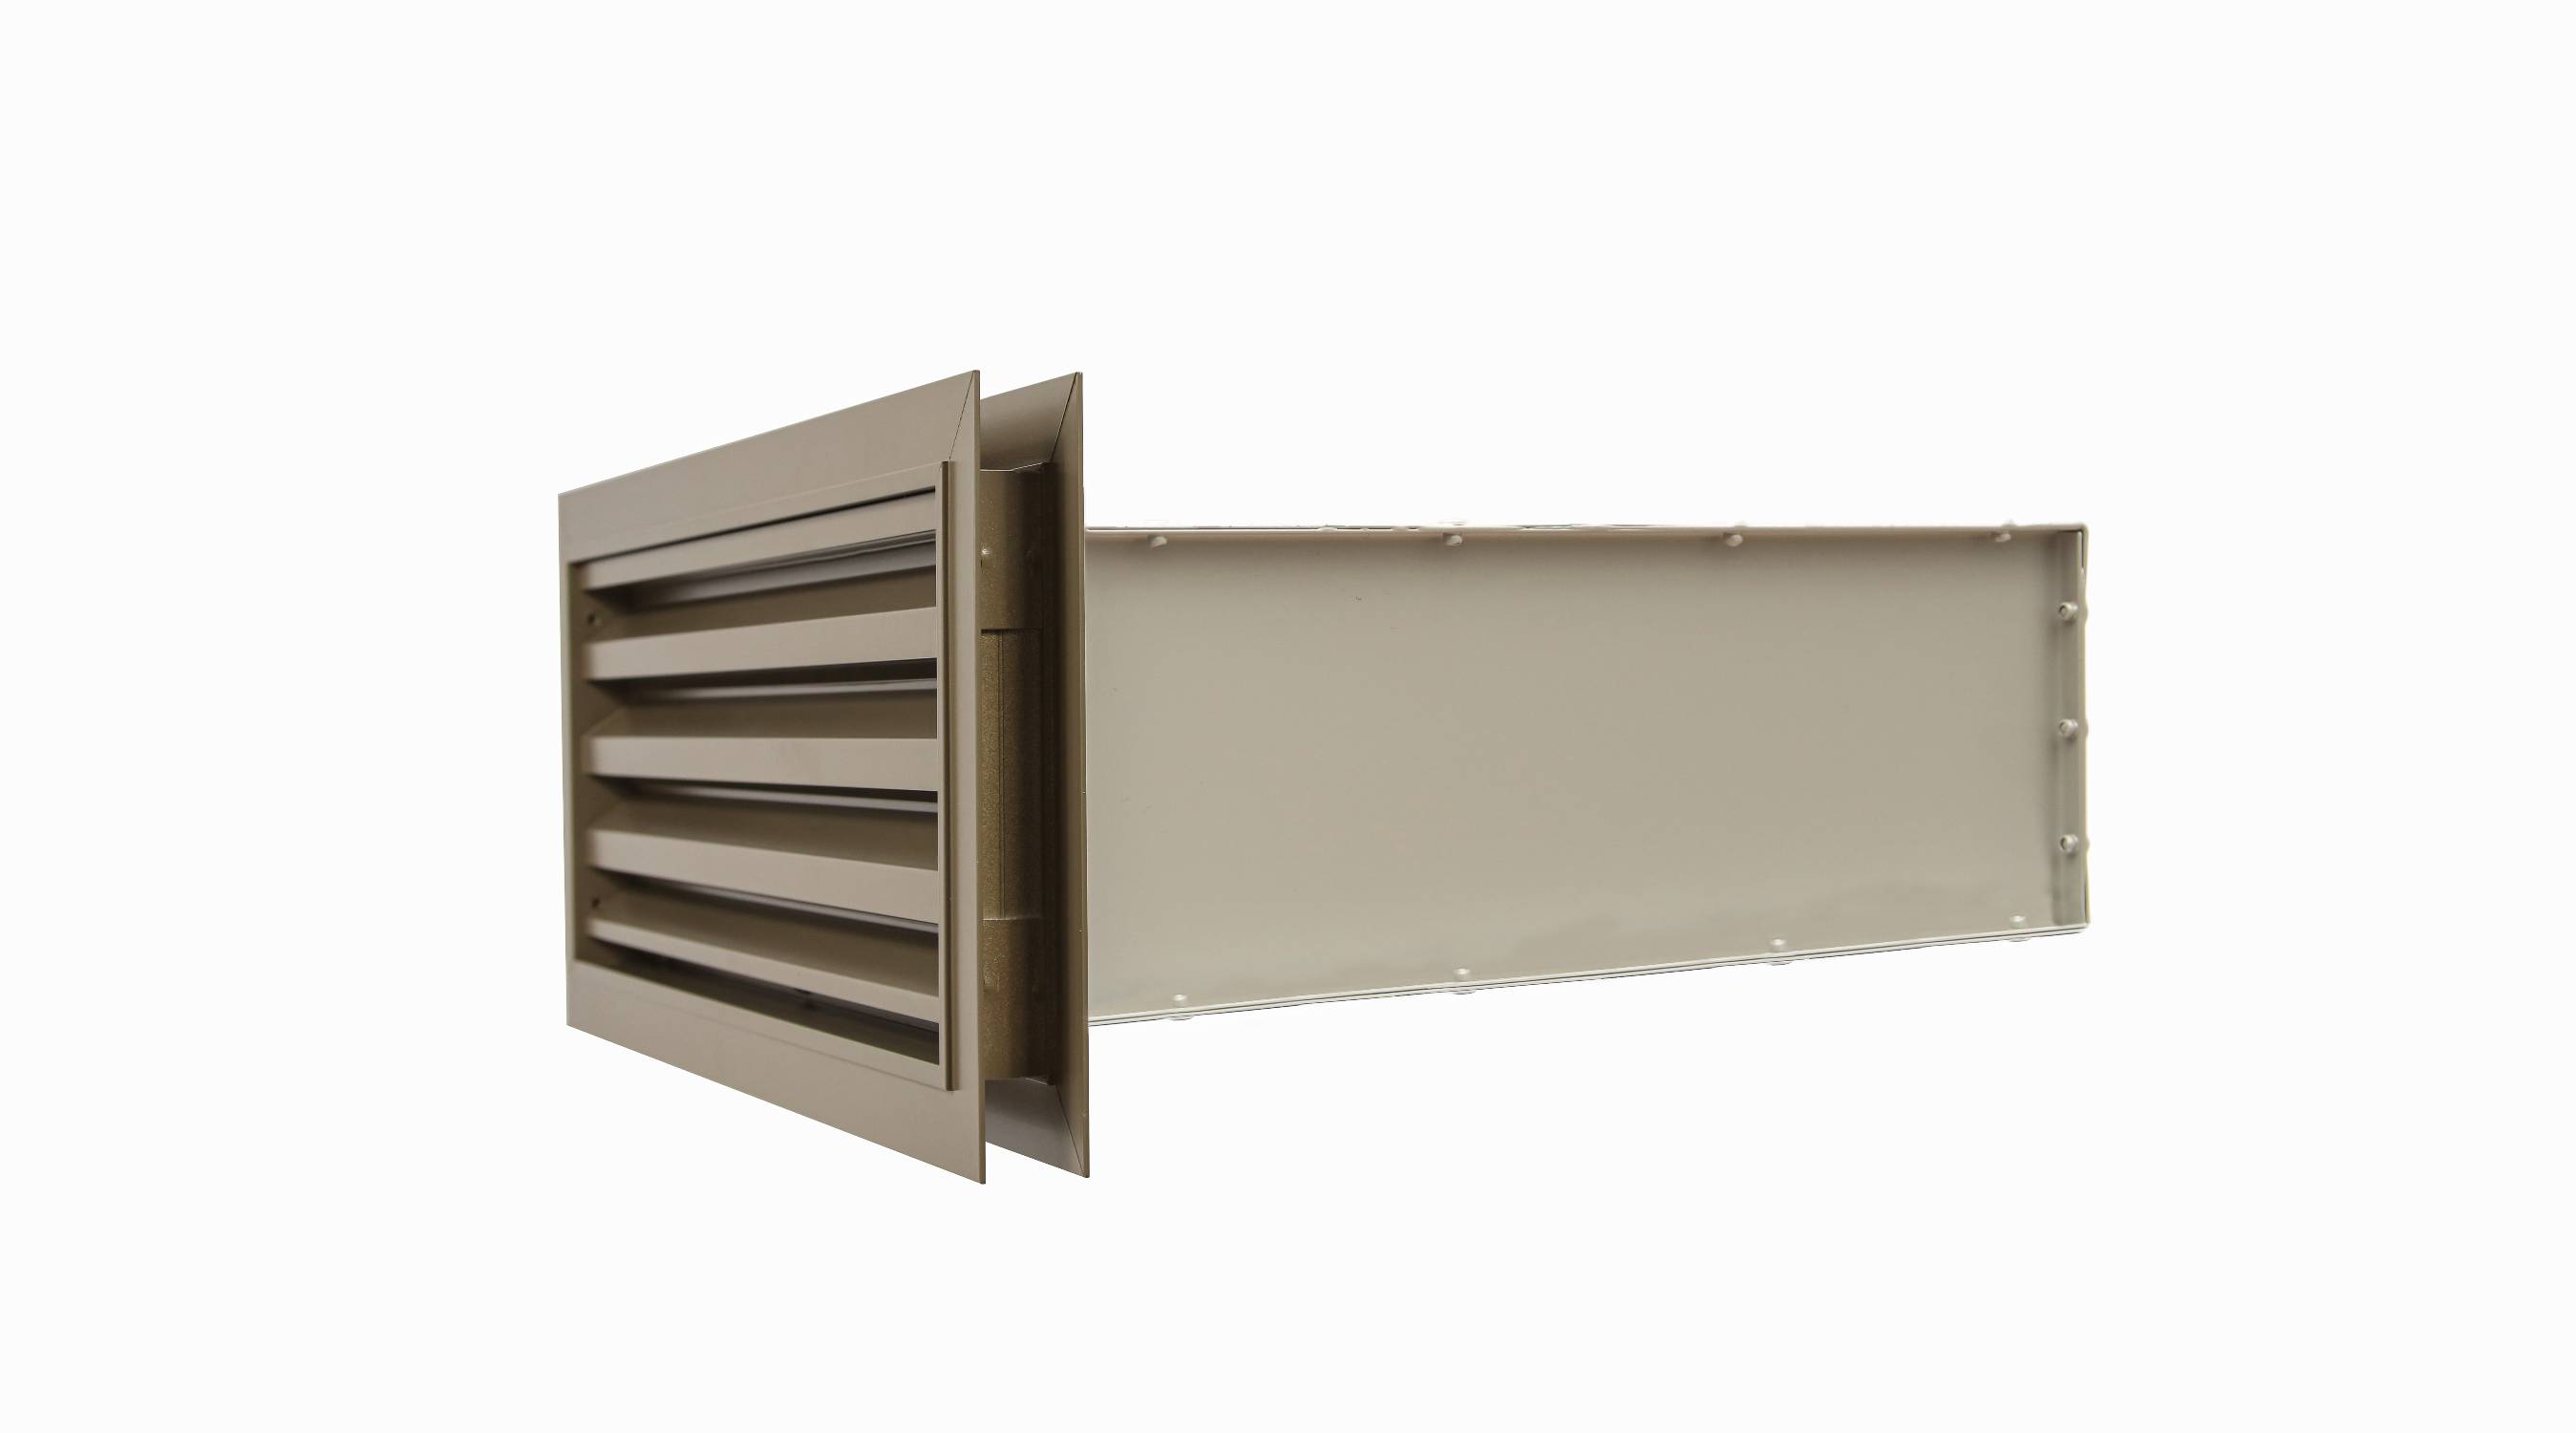 Louvre and Plenum: Mechanical Intake or Extract - Integrated Ventilation Solutions